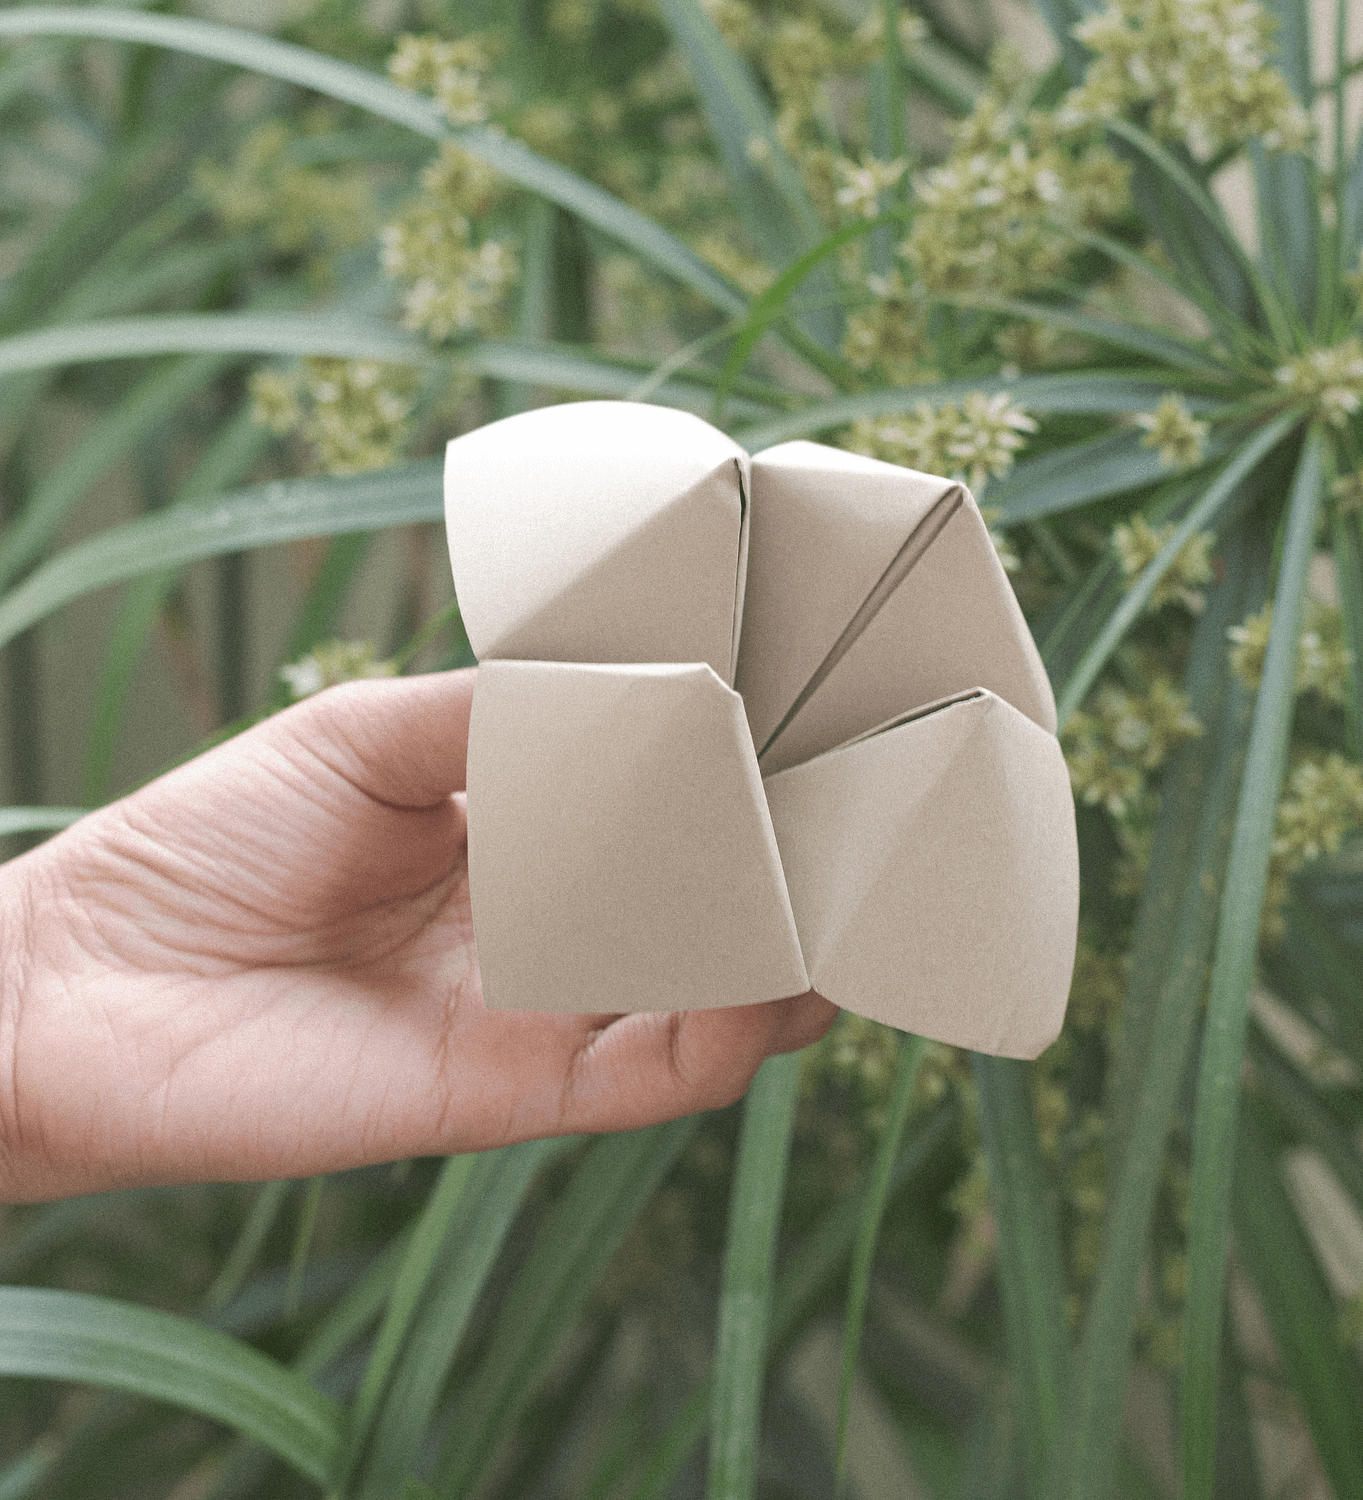 Kagazi: A hand holding a brown colour paper chatterbox